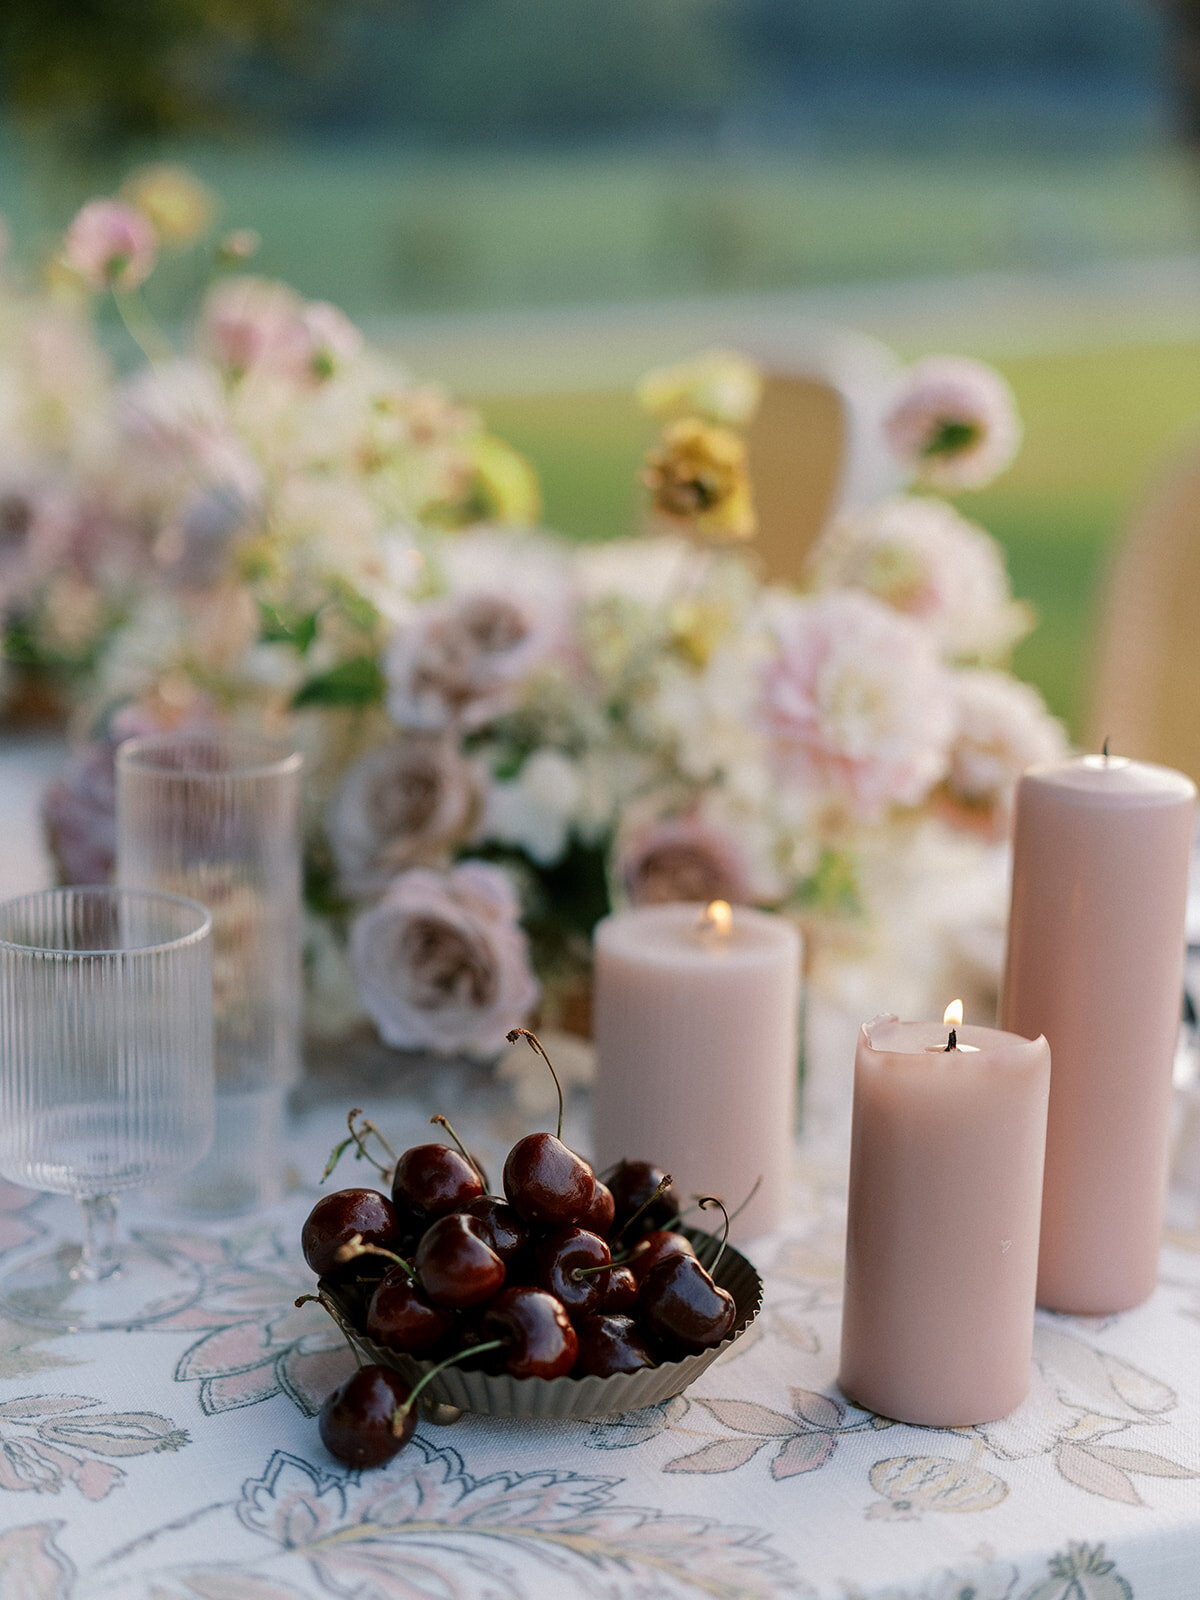 Blush candles lit beside a dish full and cherries and florals in the background.